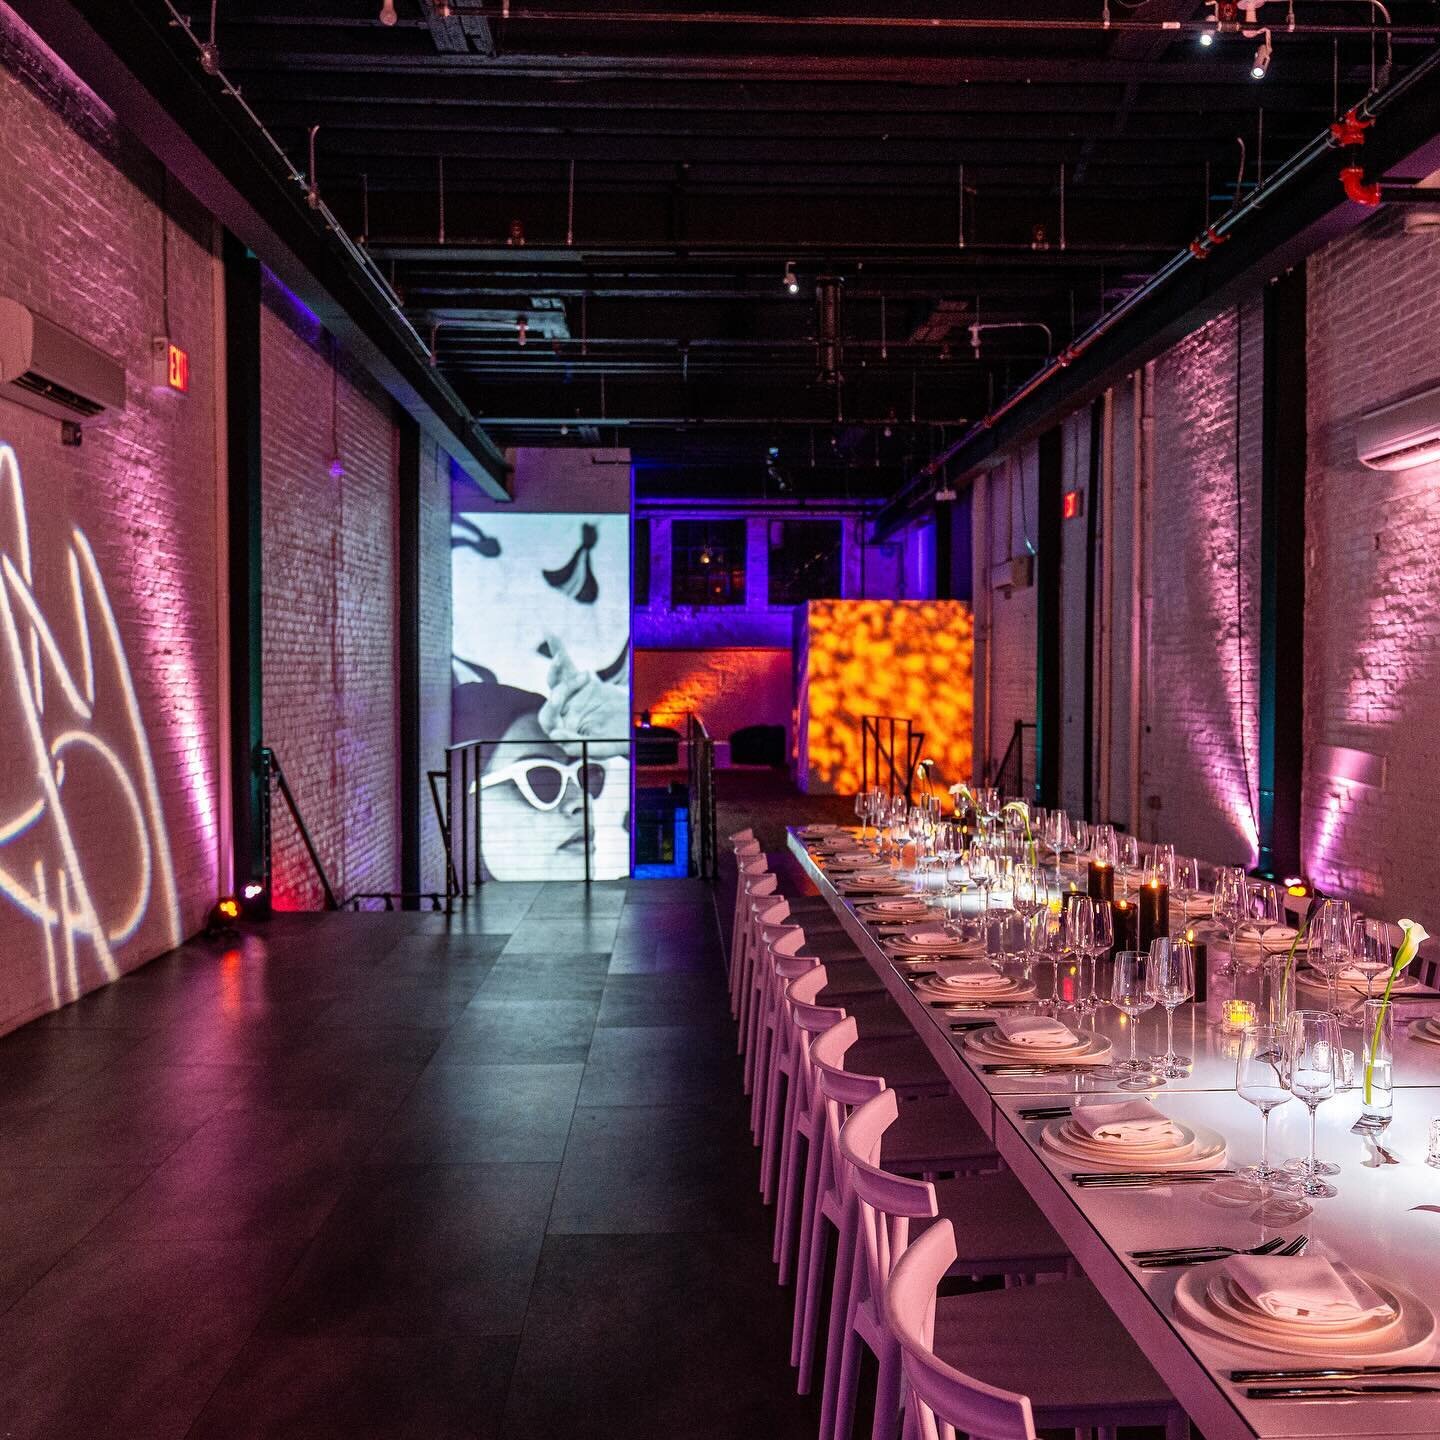 Cancel your reservation and host your next dinner at ELM 🍾 We love smaller intimate events as much as big brand activations! Everything you need from furniture and catering rentals for up to 50 guests are included at our venue, along with an extensi